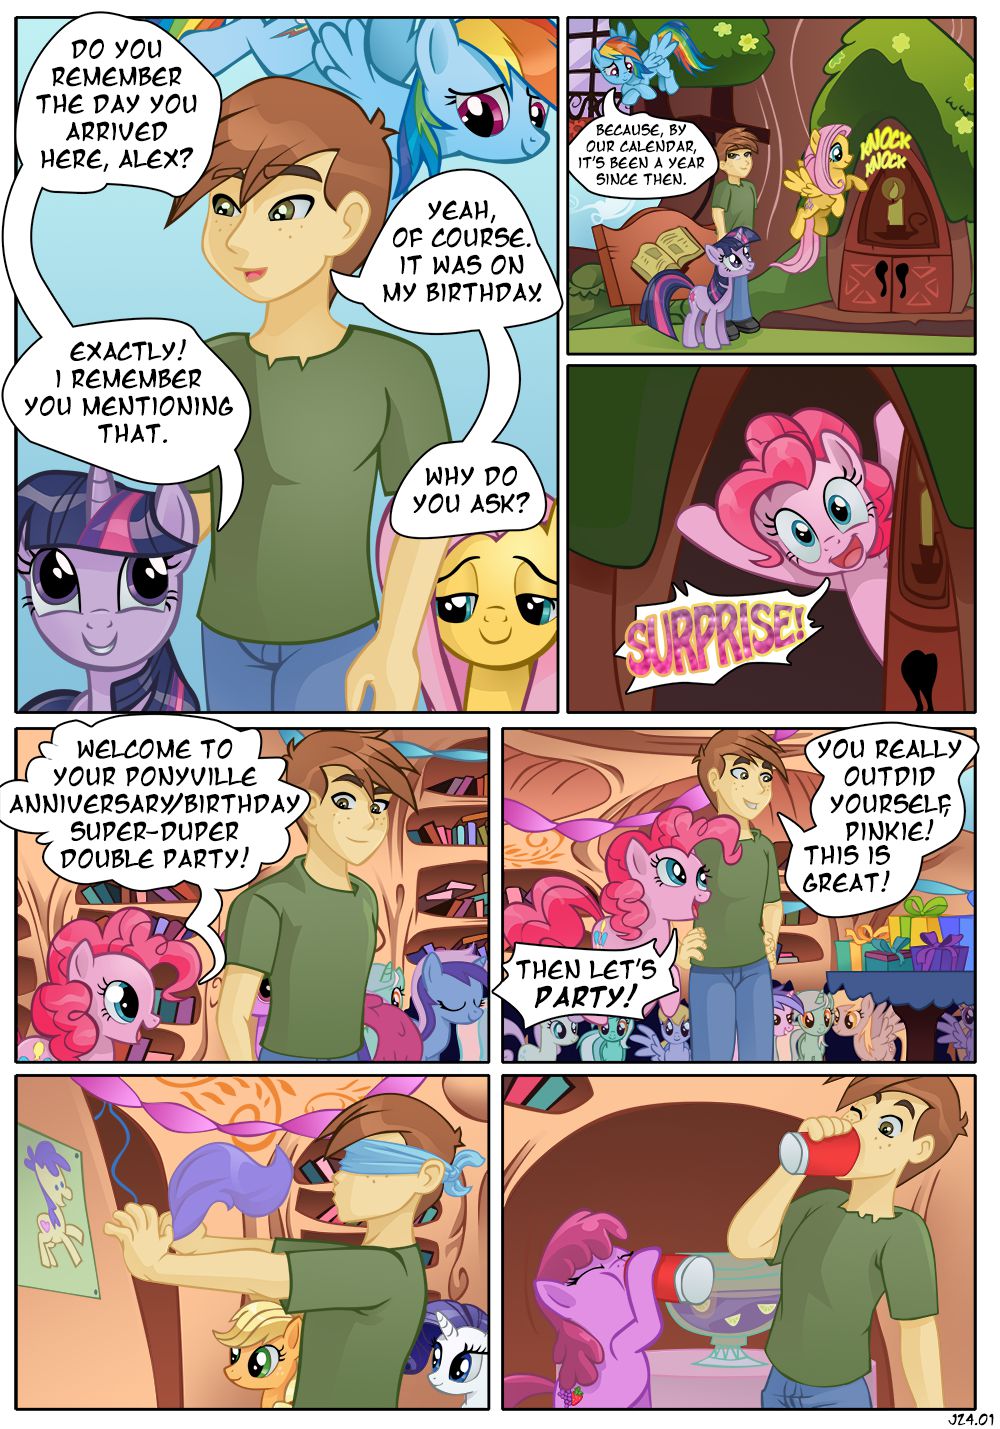 [Nearphotison] July 24 (My Little Pony: Friendship is Magic) (Ongoing) 2